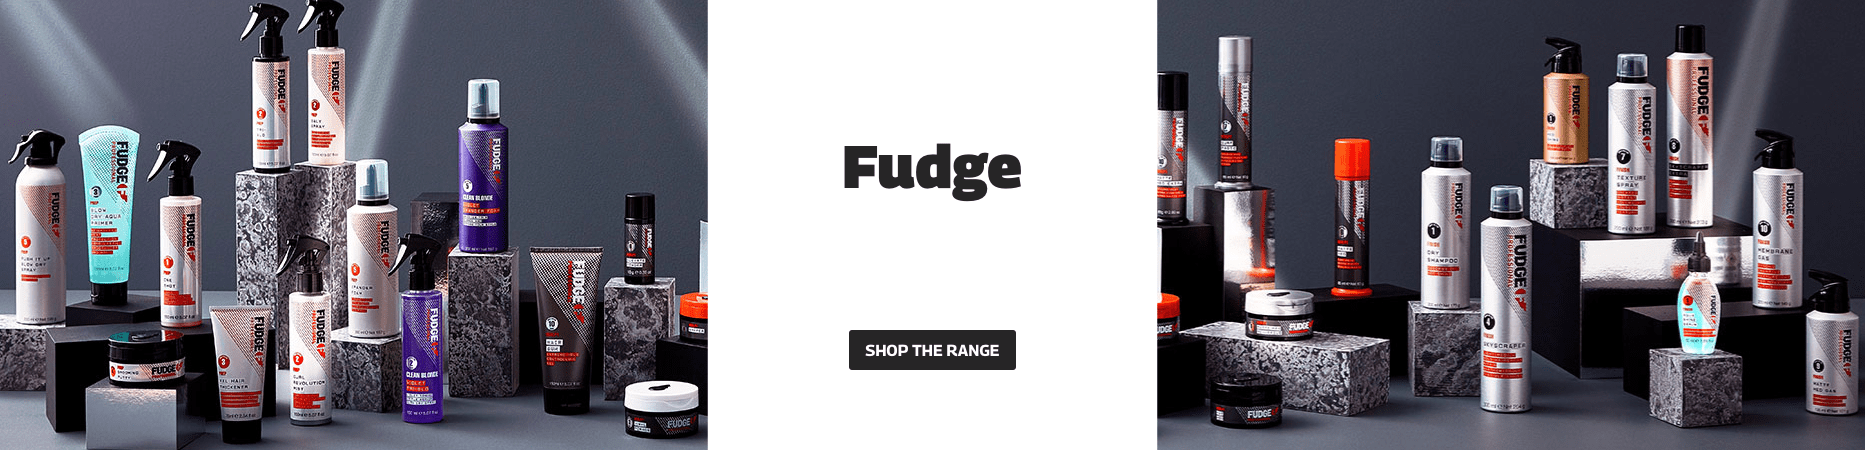 Fudge hair care products